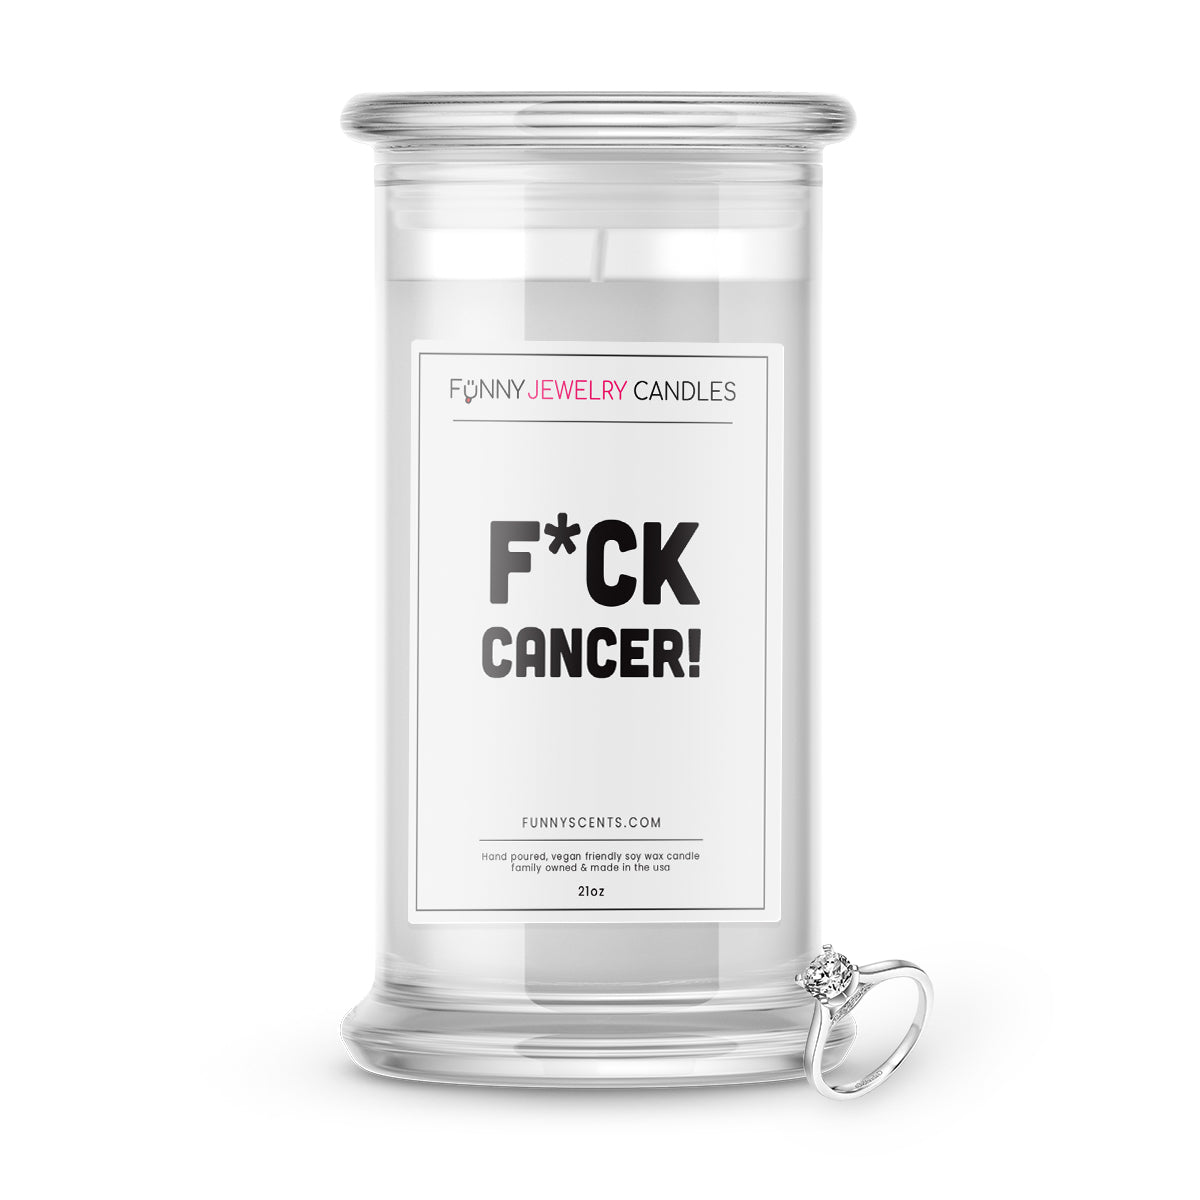 F*ck Cancer! Jewelry Funny Candles